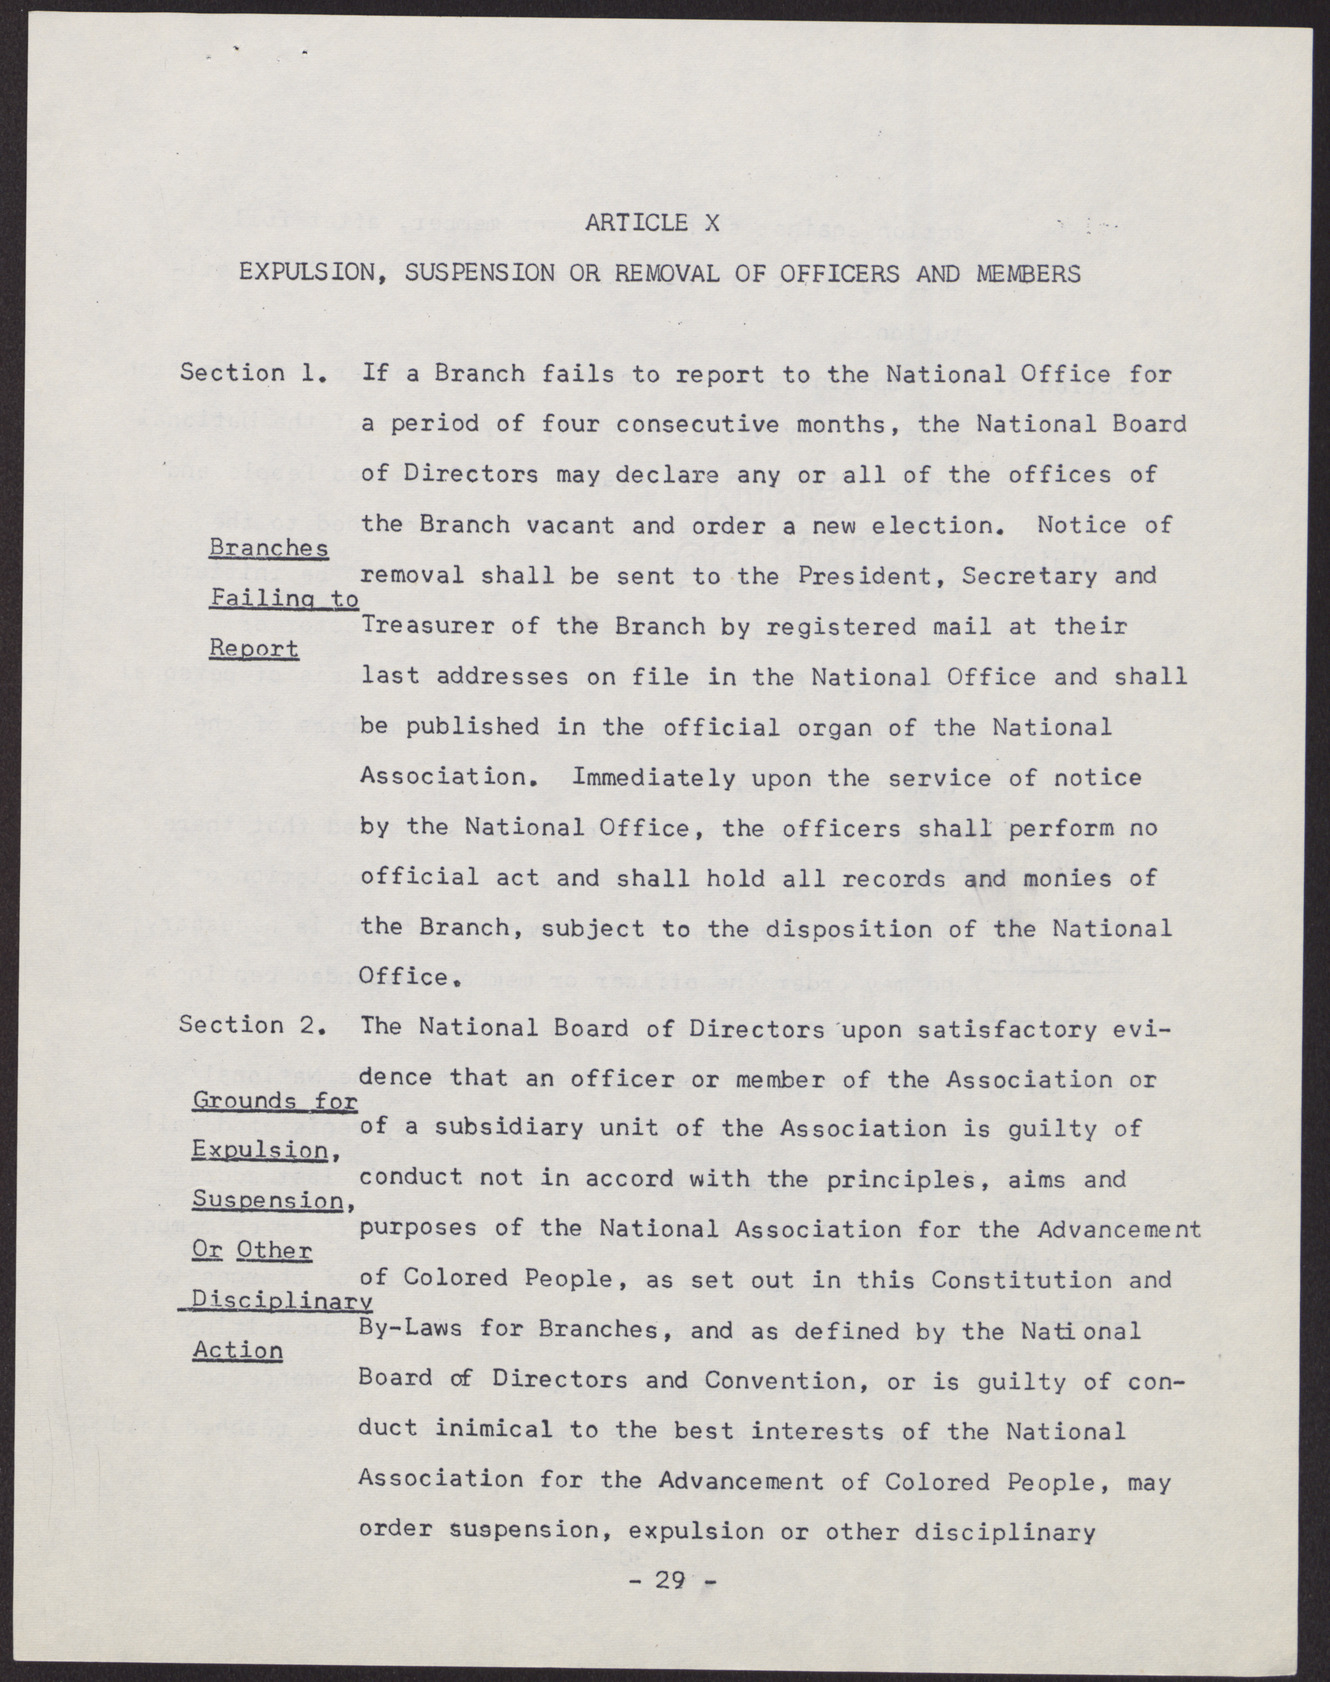 Amended Constitution and By-laws for branches of the NAACP (36 pages), no date, page 29